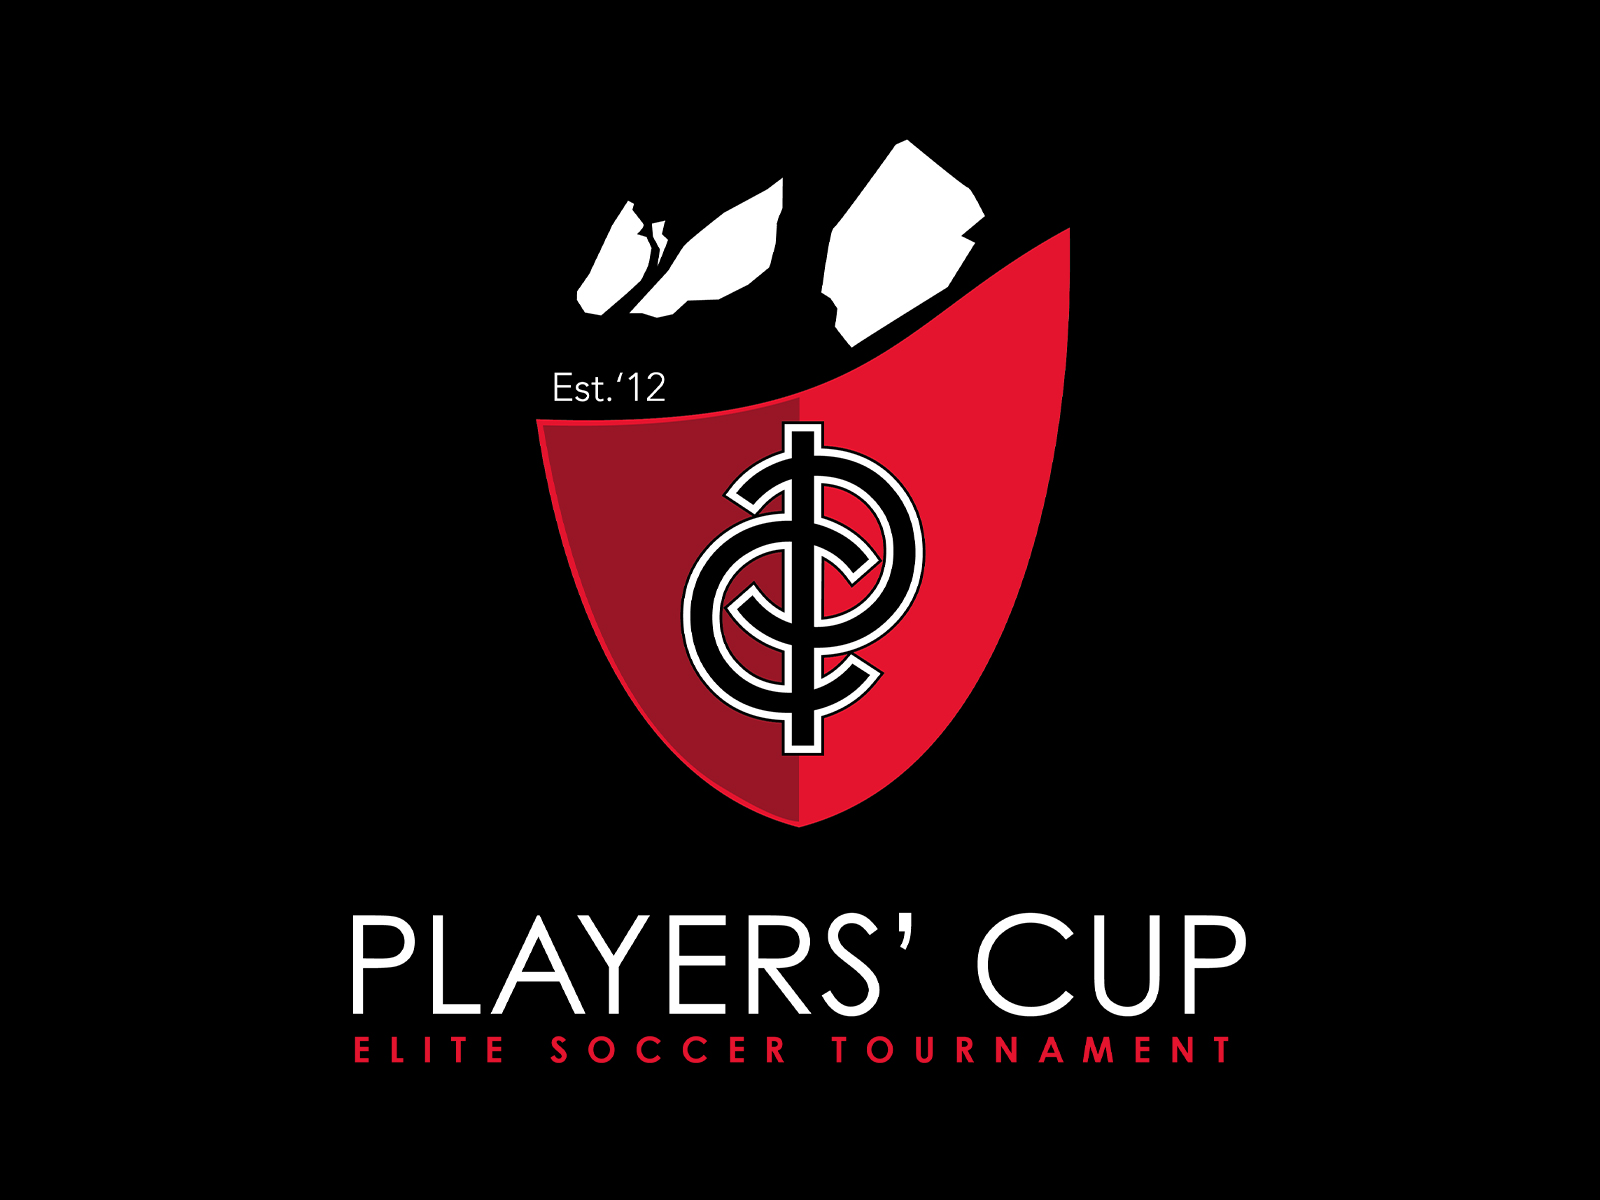 The Players Cup